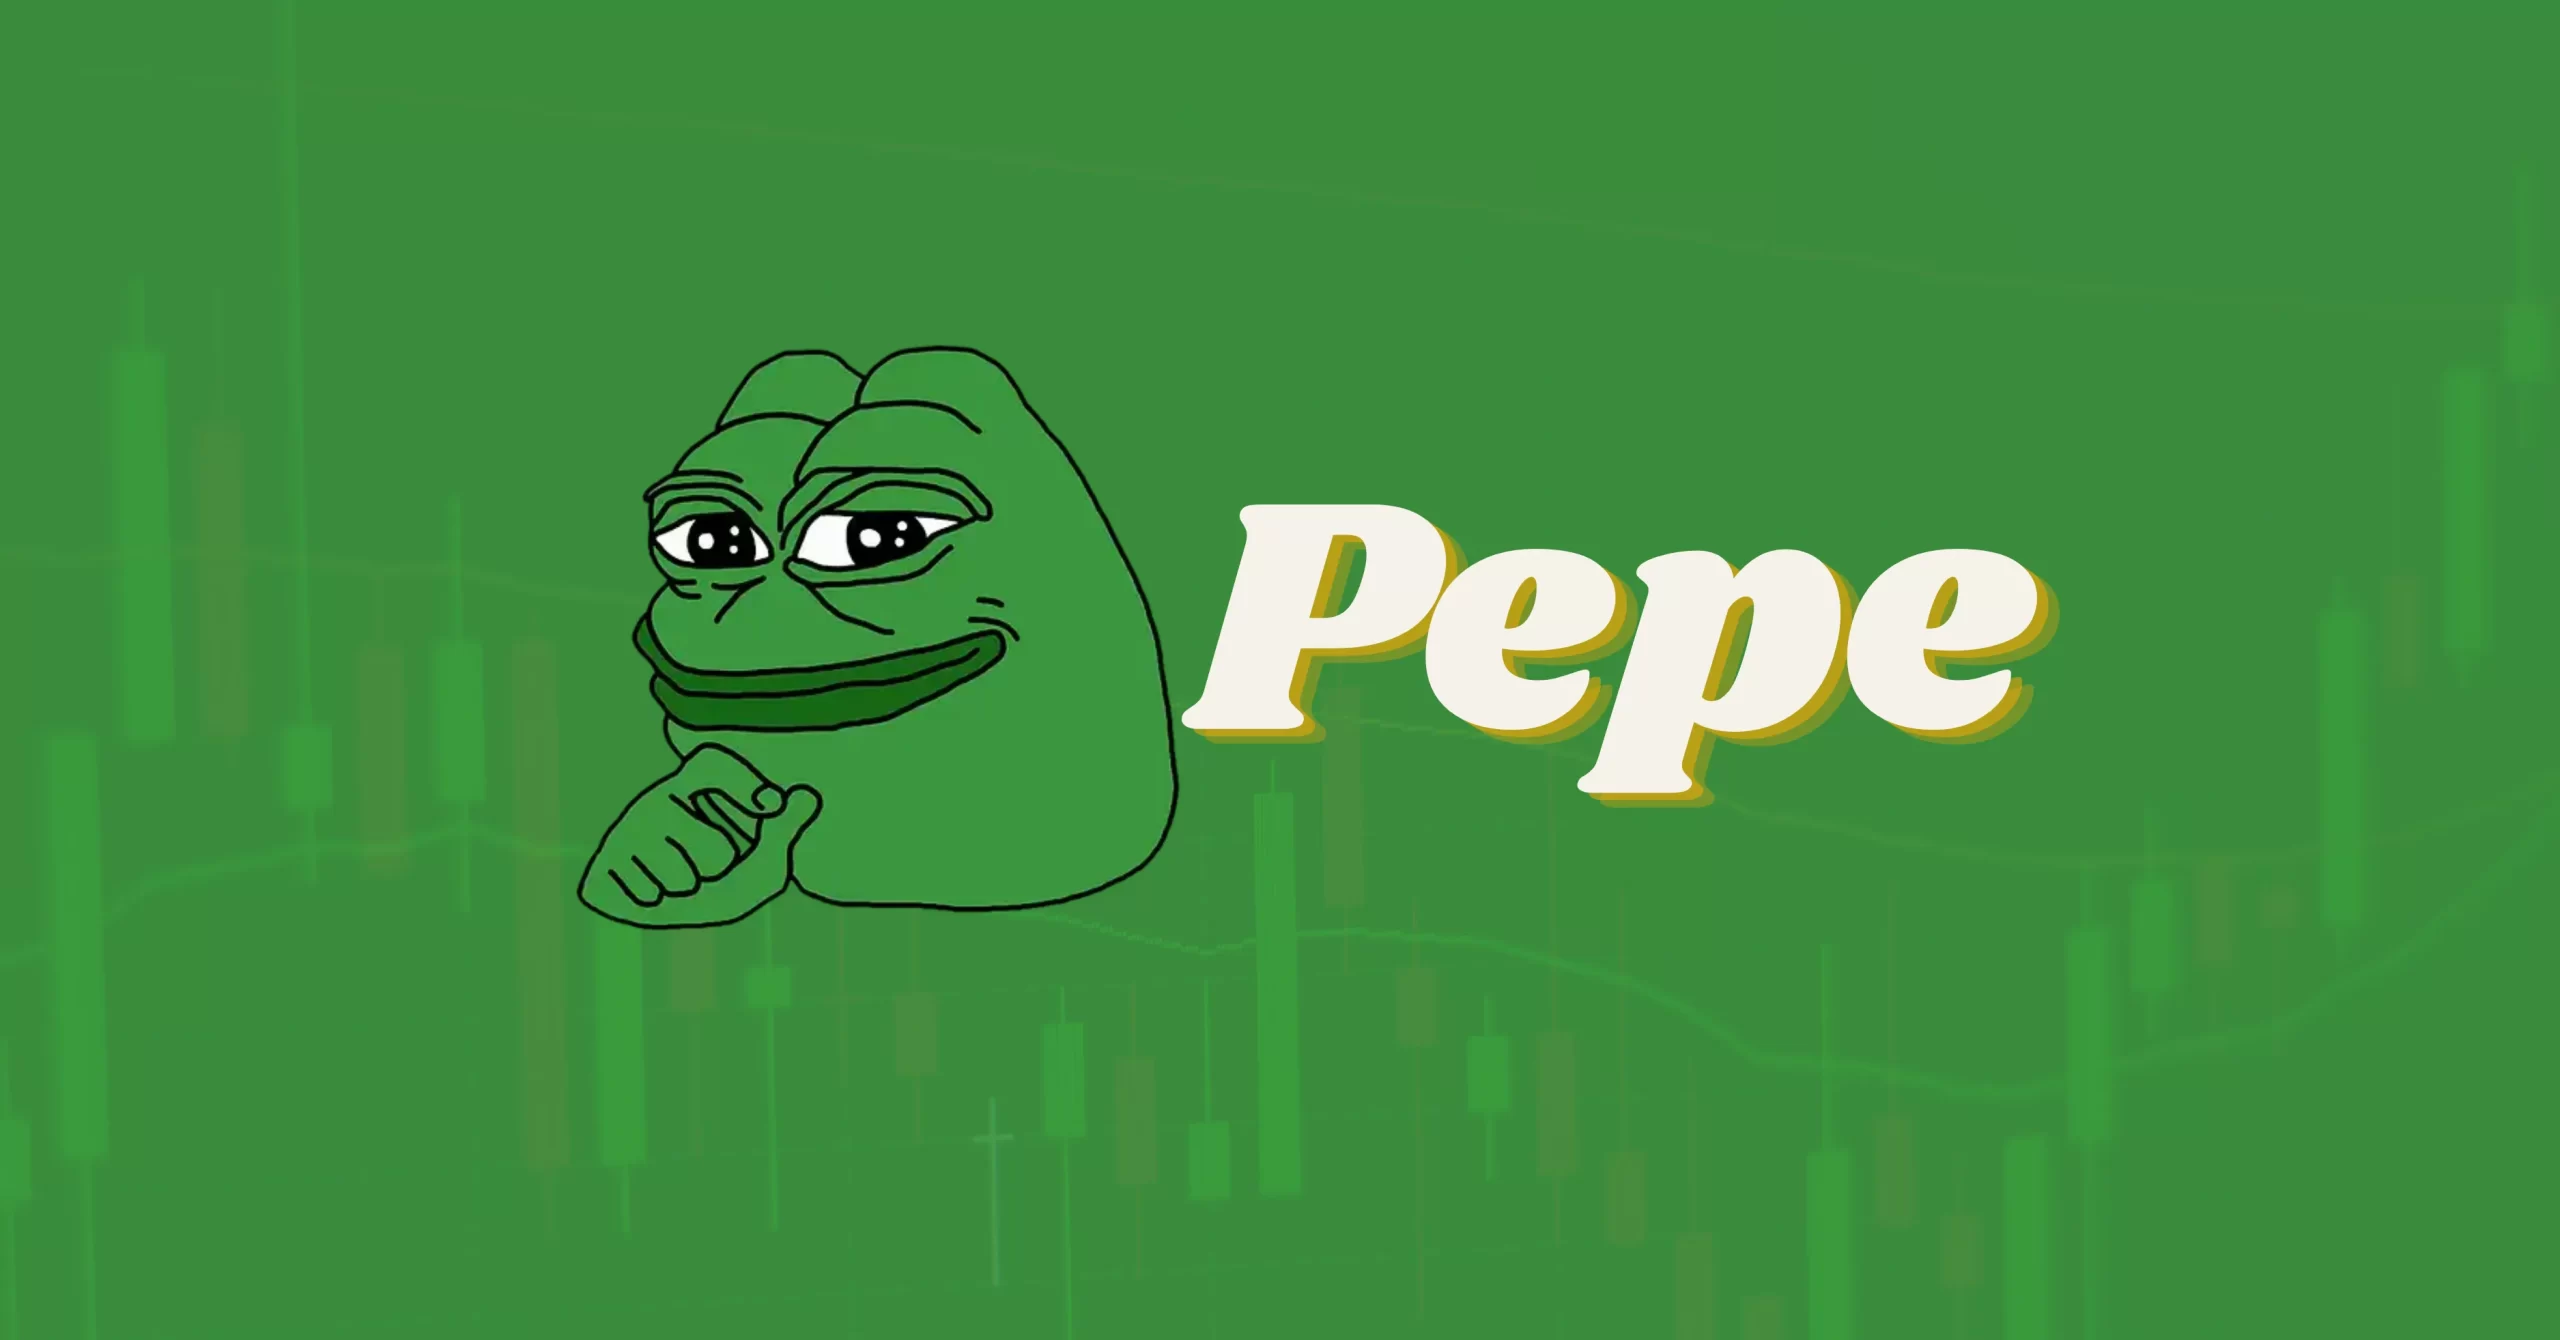 Trader excitement leads to additional cryptocurrency markets listing PEPE